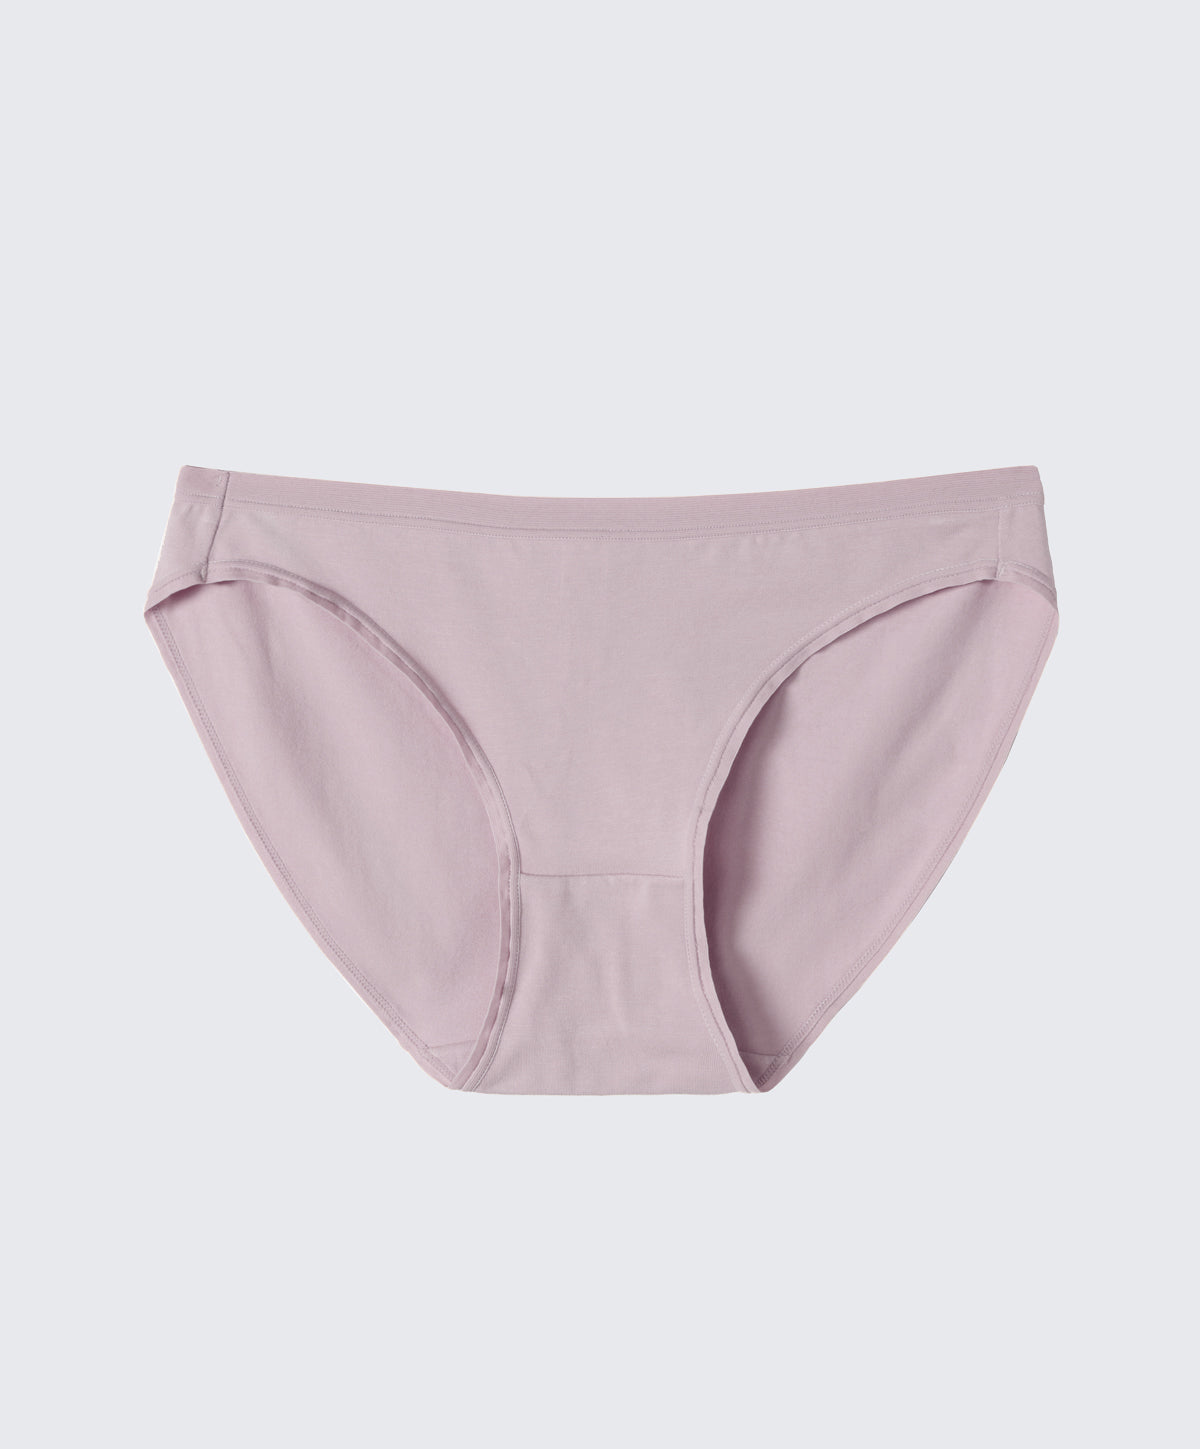 EXTRA LARGE Tagged Cotton Panties - Pierre Cardin Lingerie